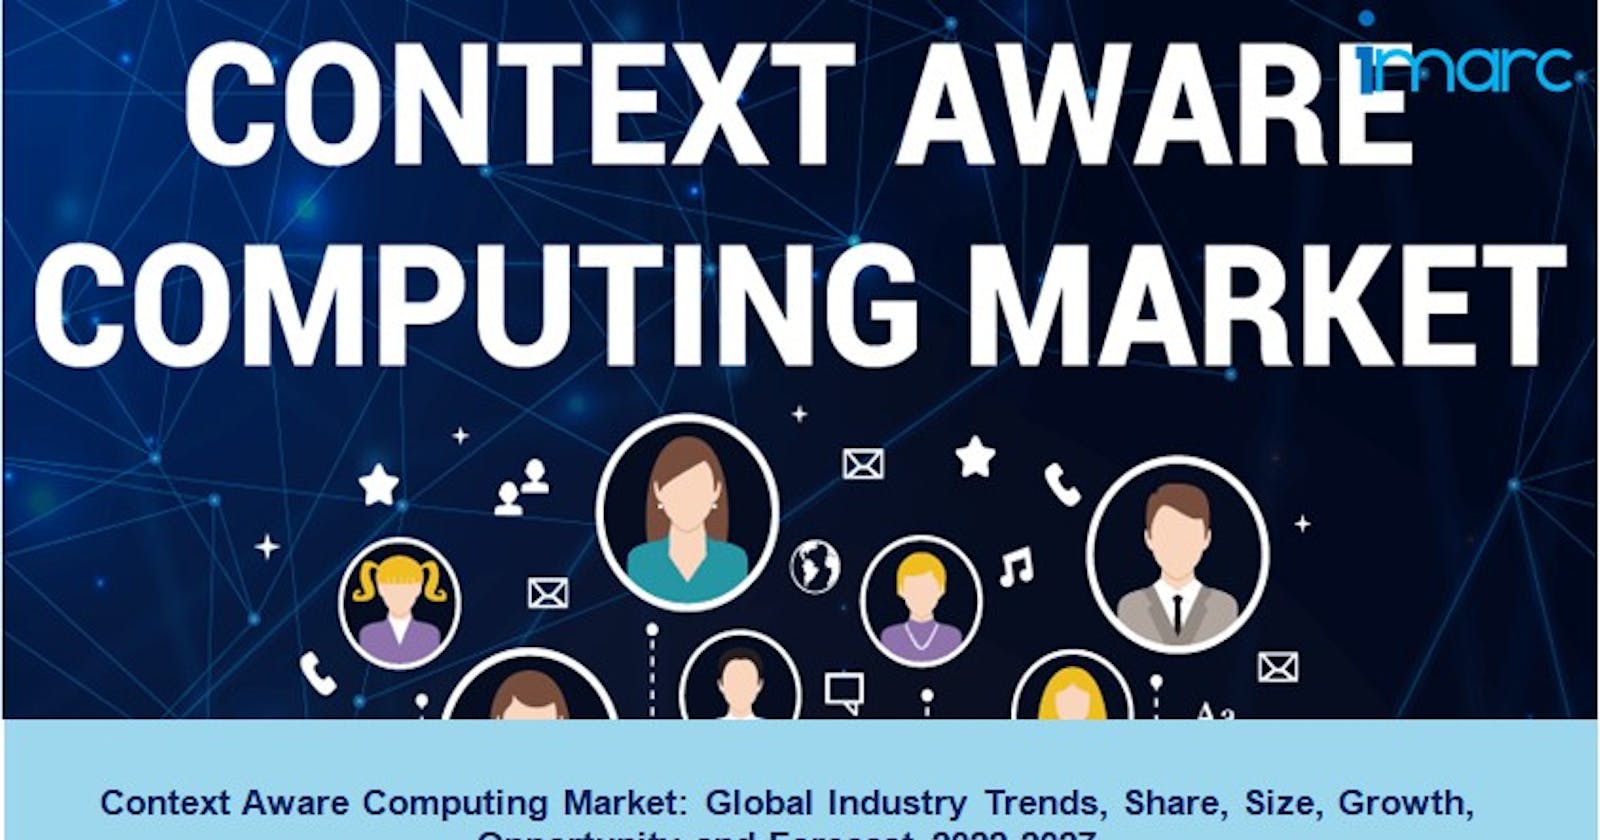 Context Aware Computing Market Size, Demand, Growth and Forecast 2022-2027